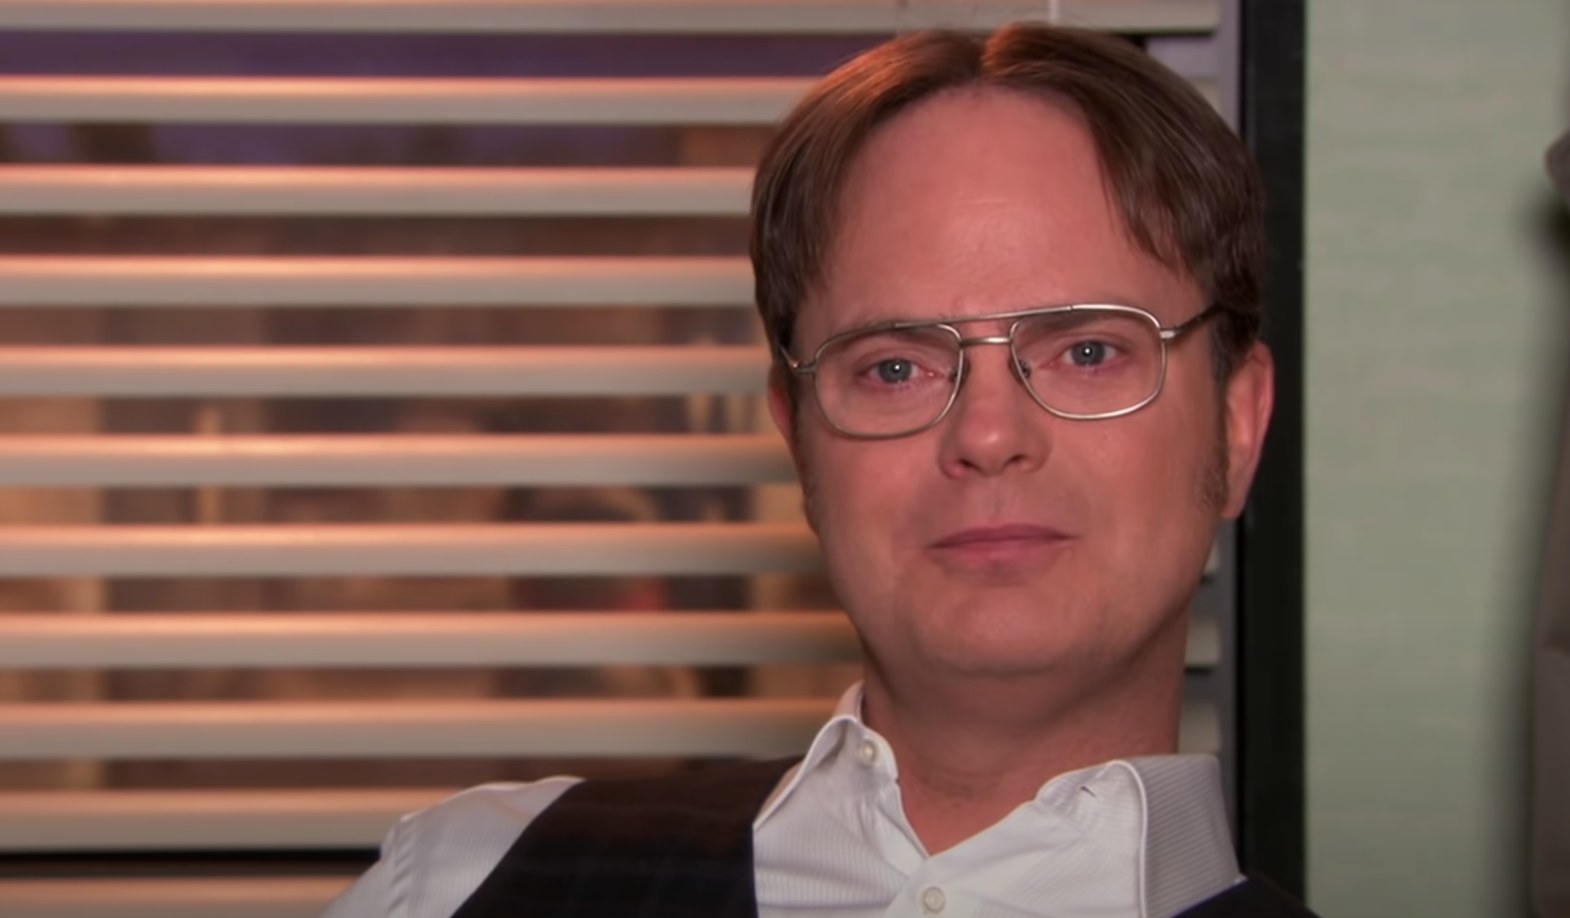 Dwight Schrute staring away at the camera while getting ready to speak